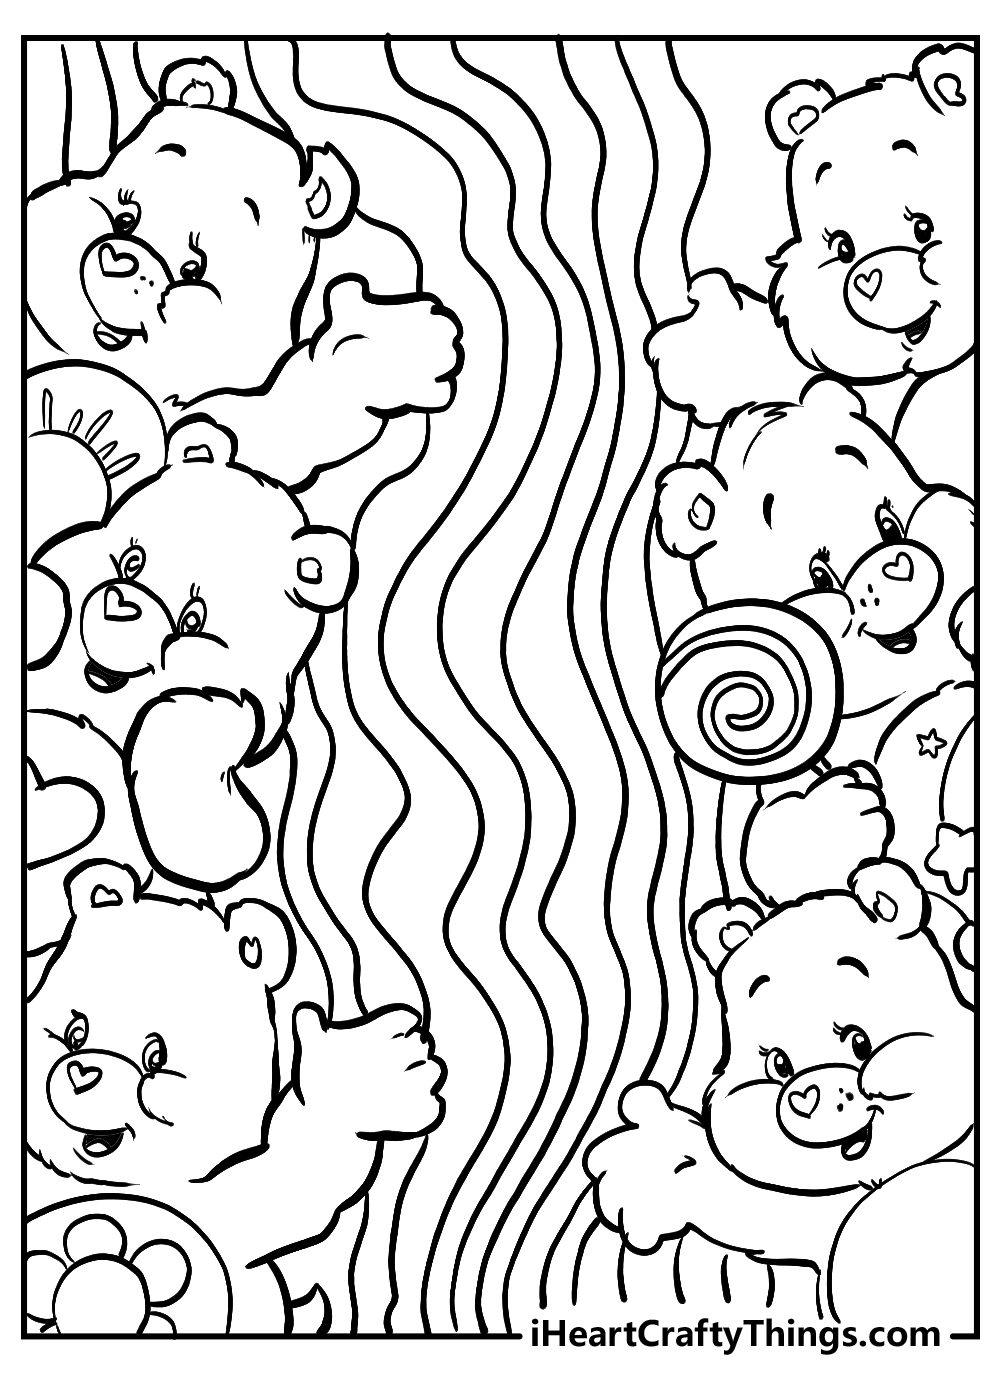 care bears coloring sheet free download